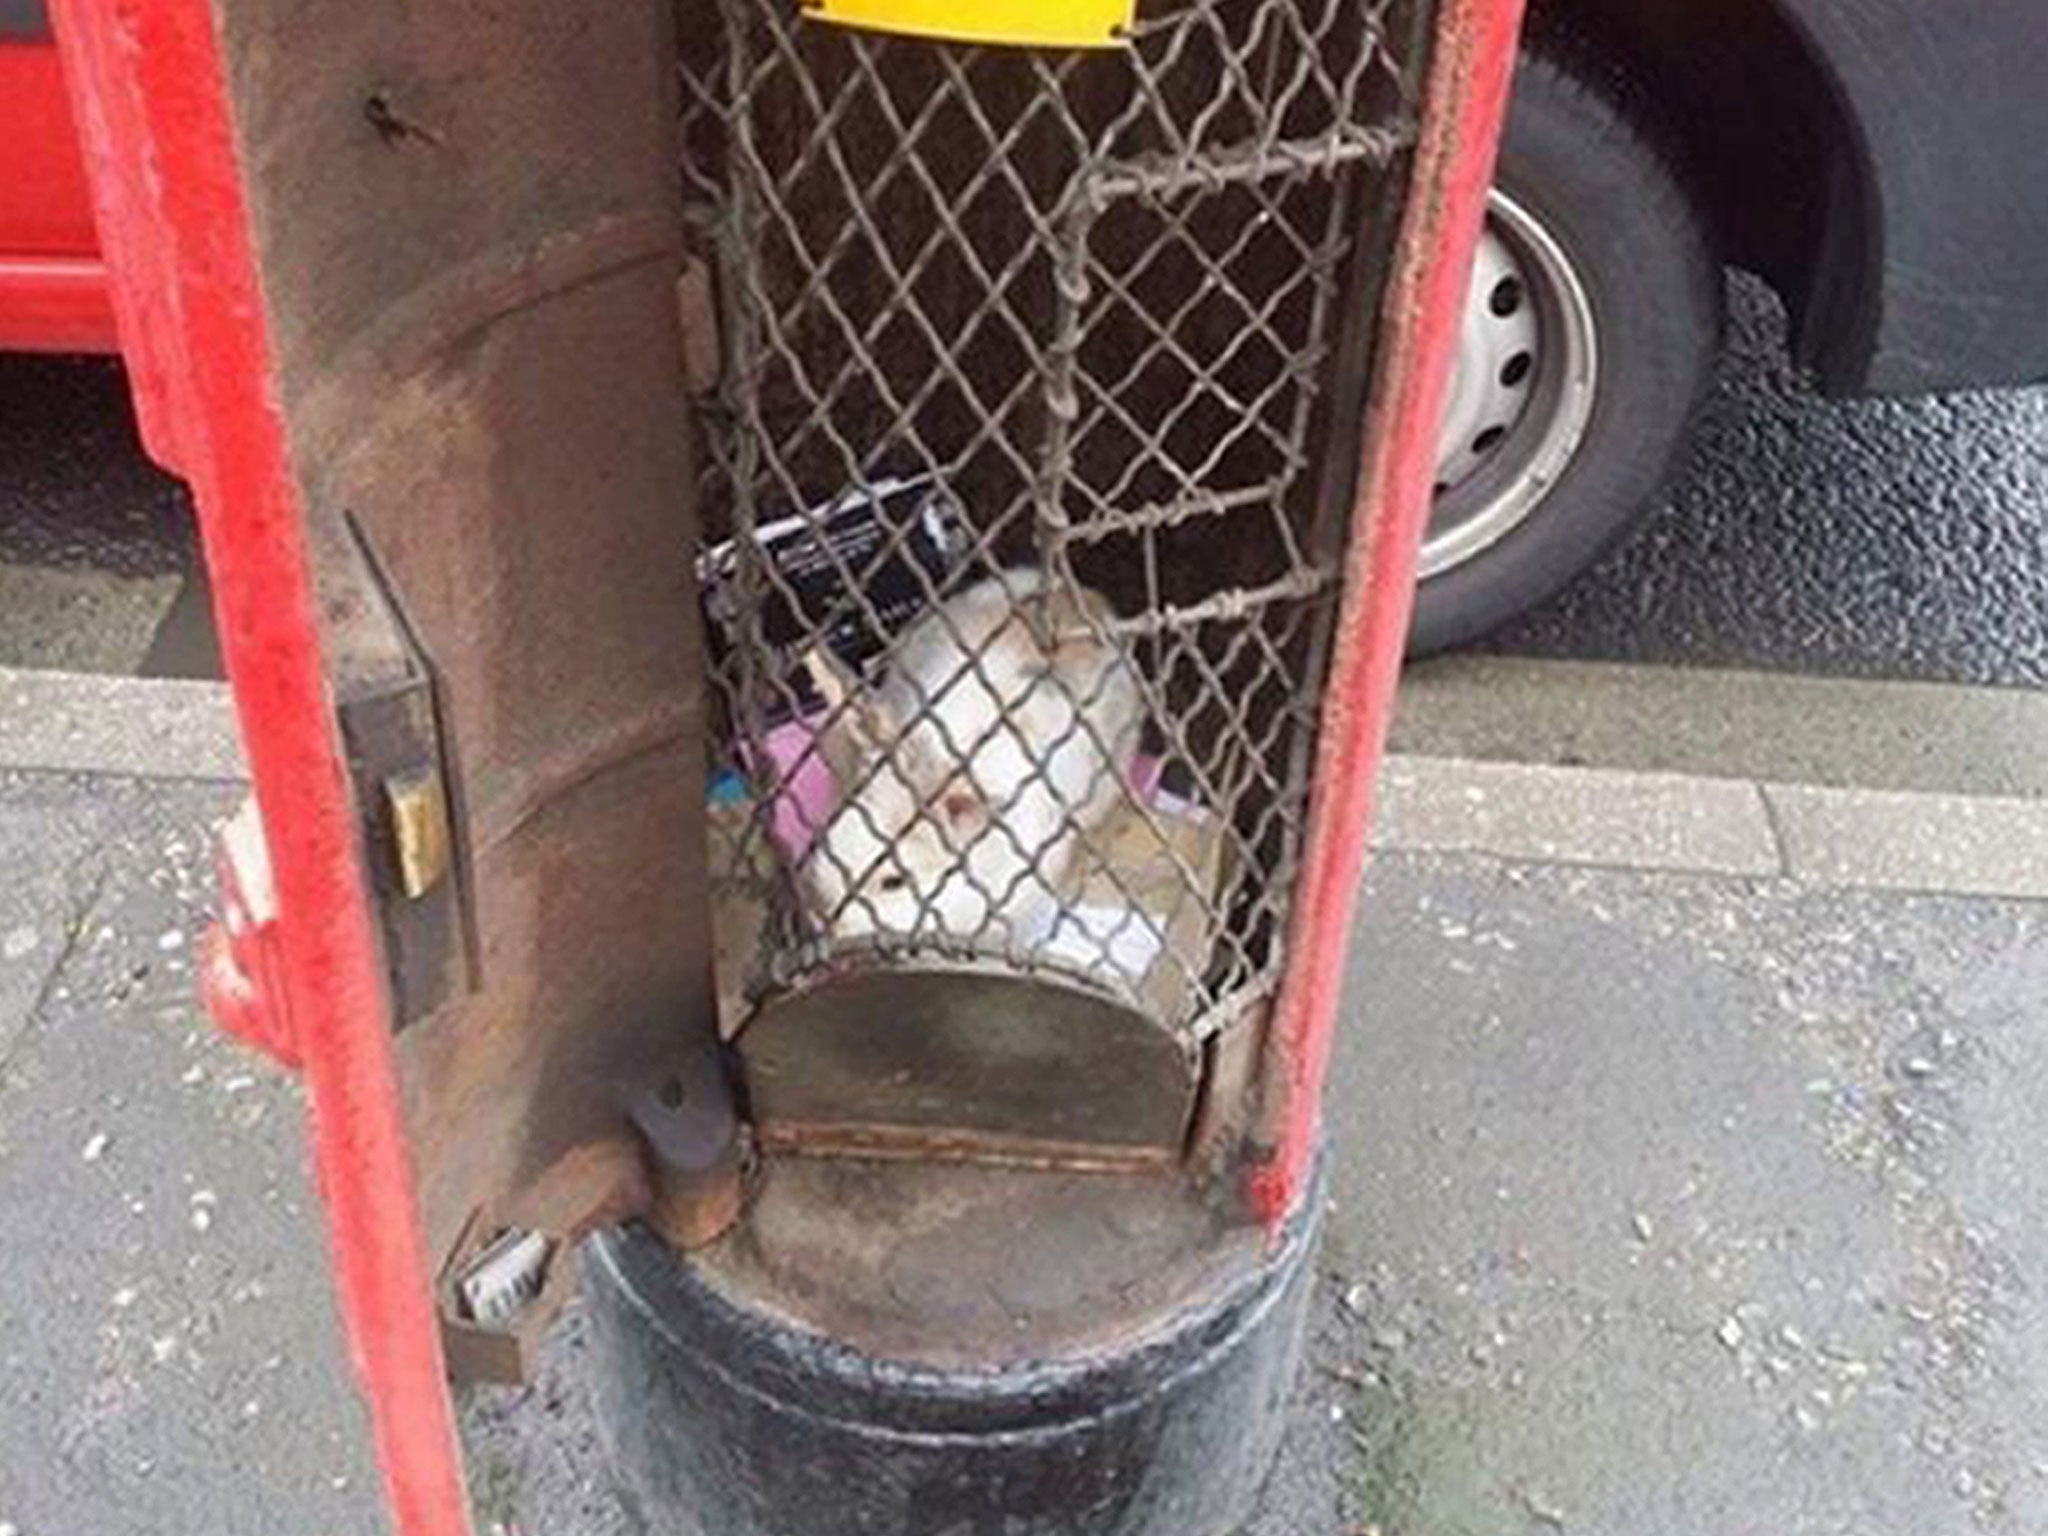 A postman found the rabbit in a postbox in Maltby, South Yorkshire